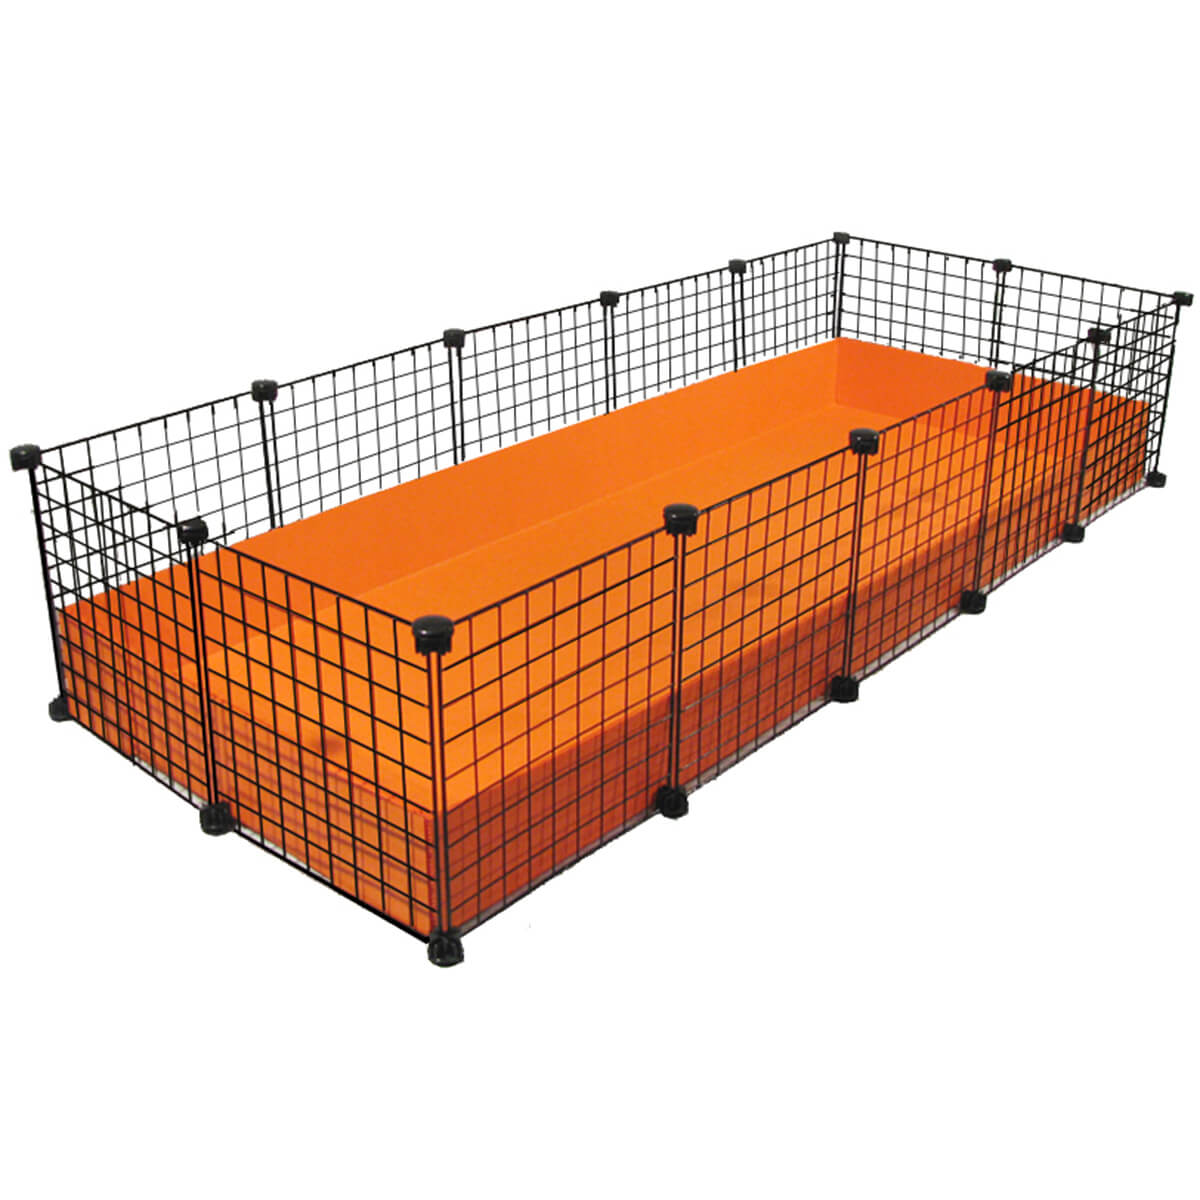 XL (2x5 Grids) Cage - Standard Cages 